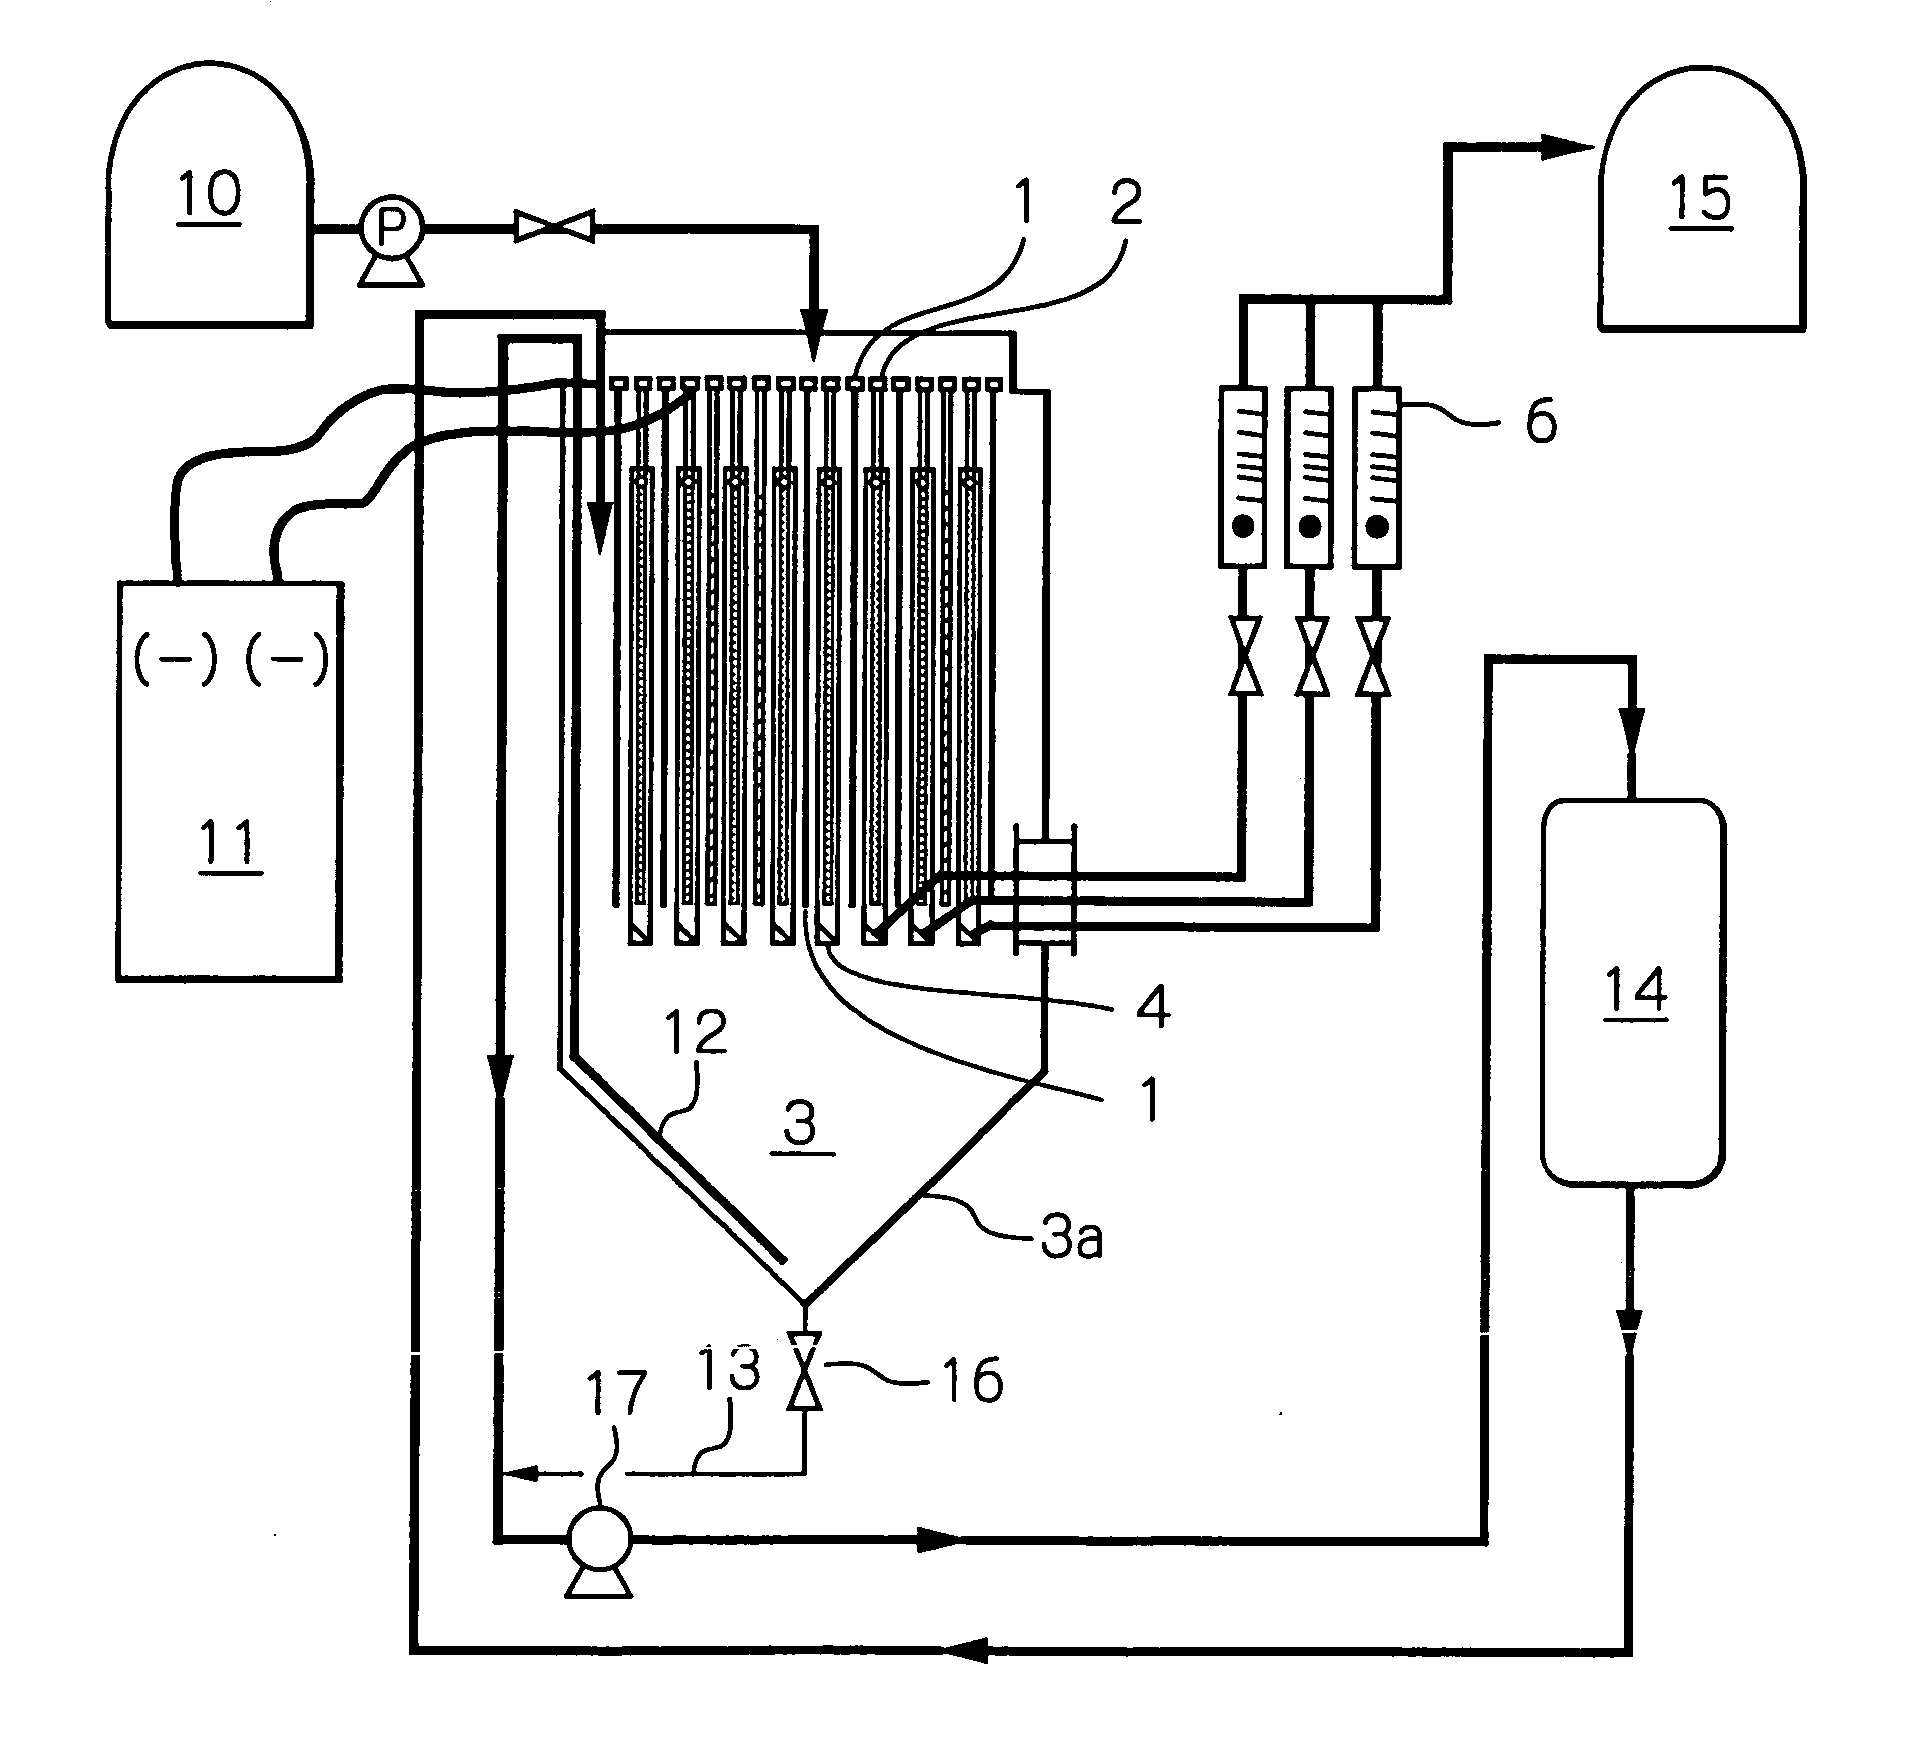 Electrolytic method in diaphragm-type cell